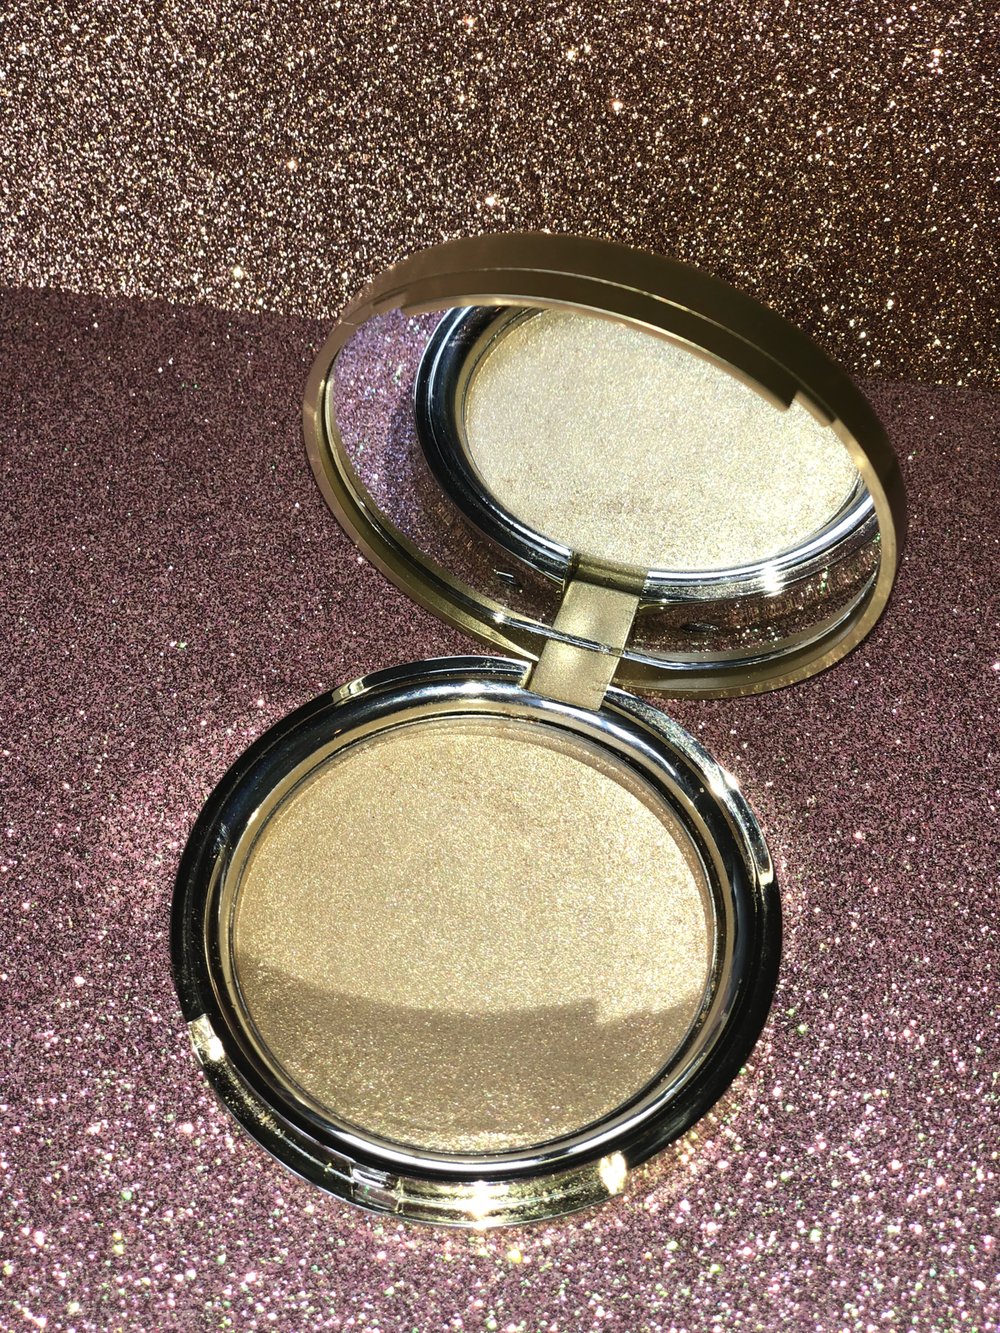 Image of “Topaz Glow” highlighter